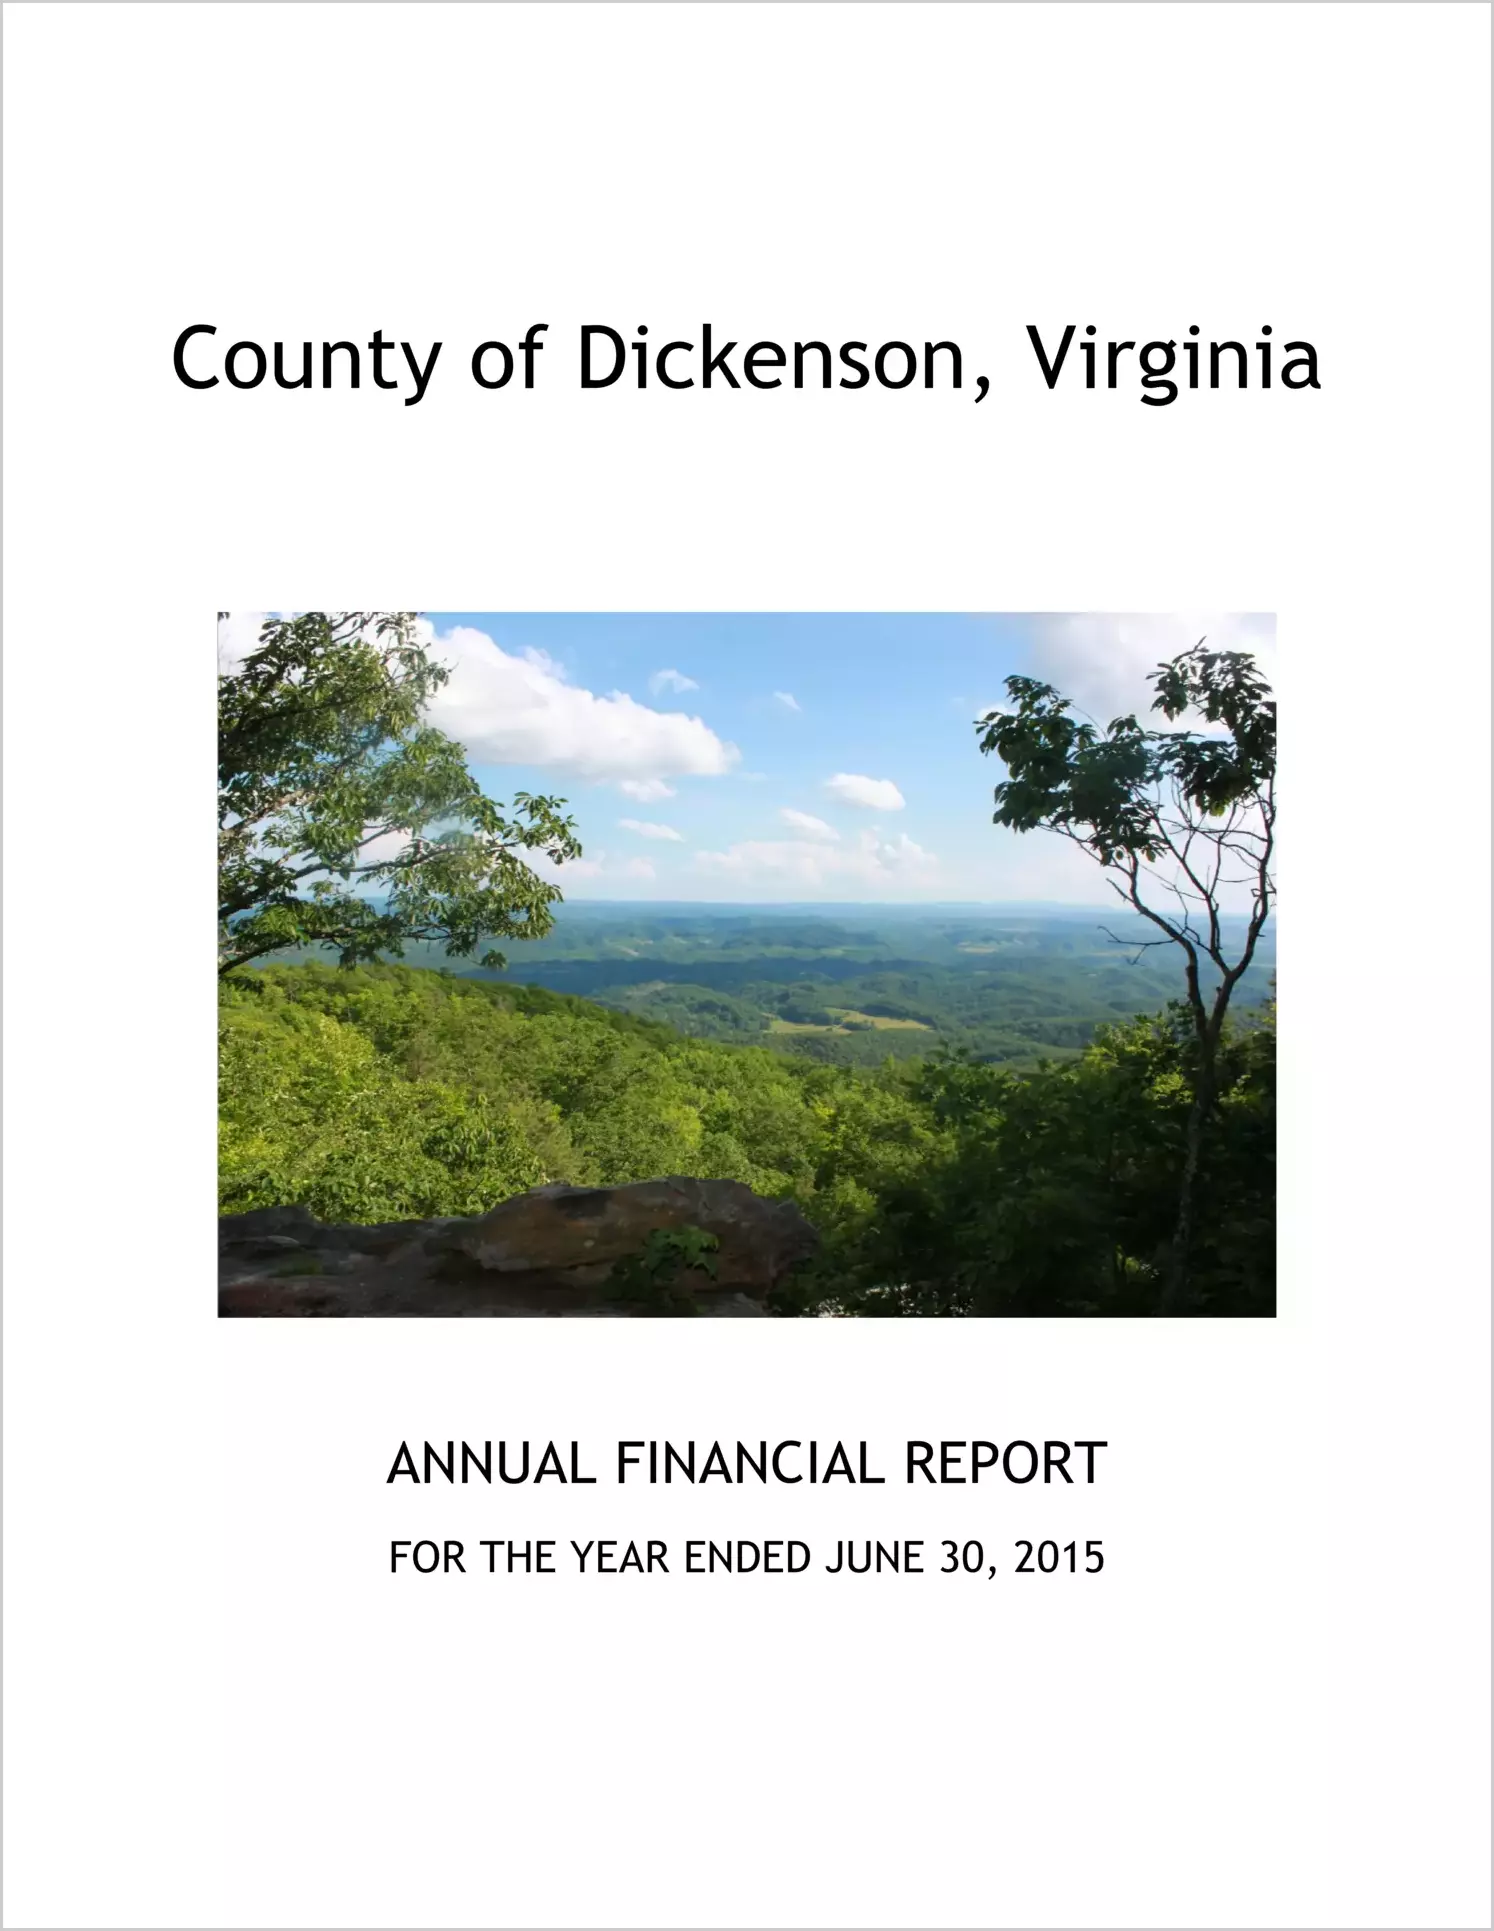 2015 Annual Financial Report for County of Dickenson